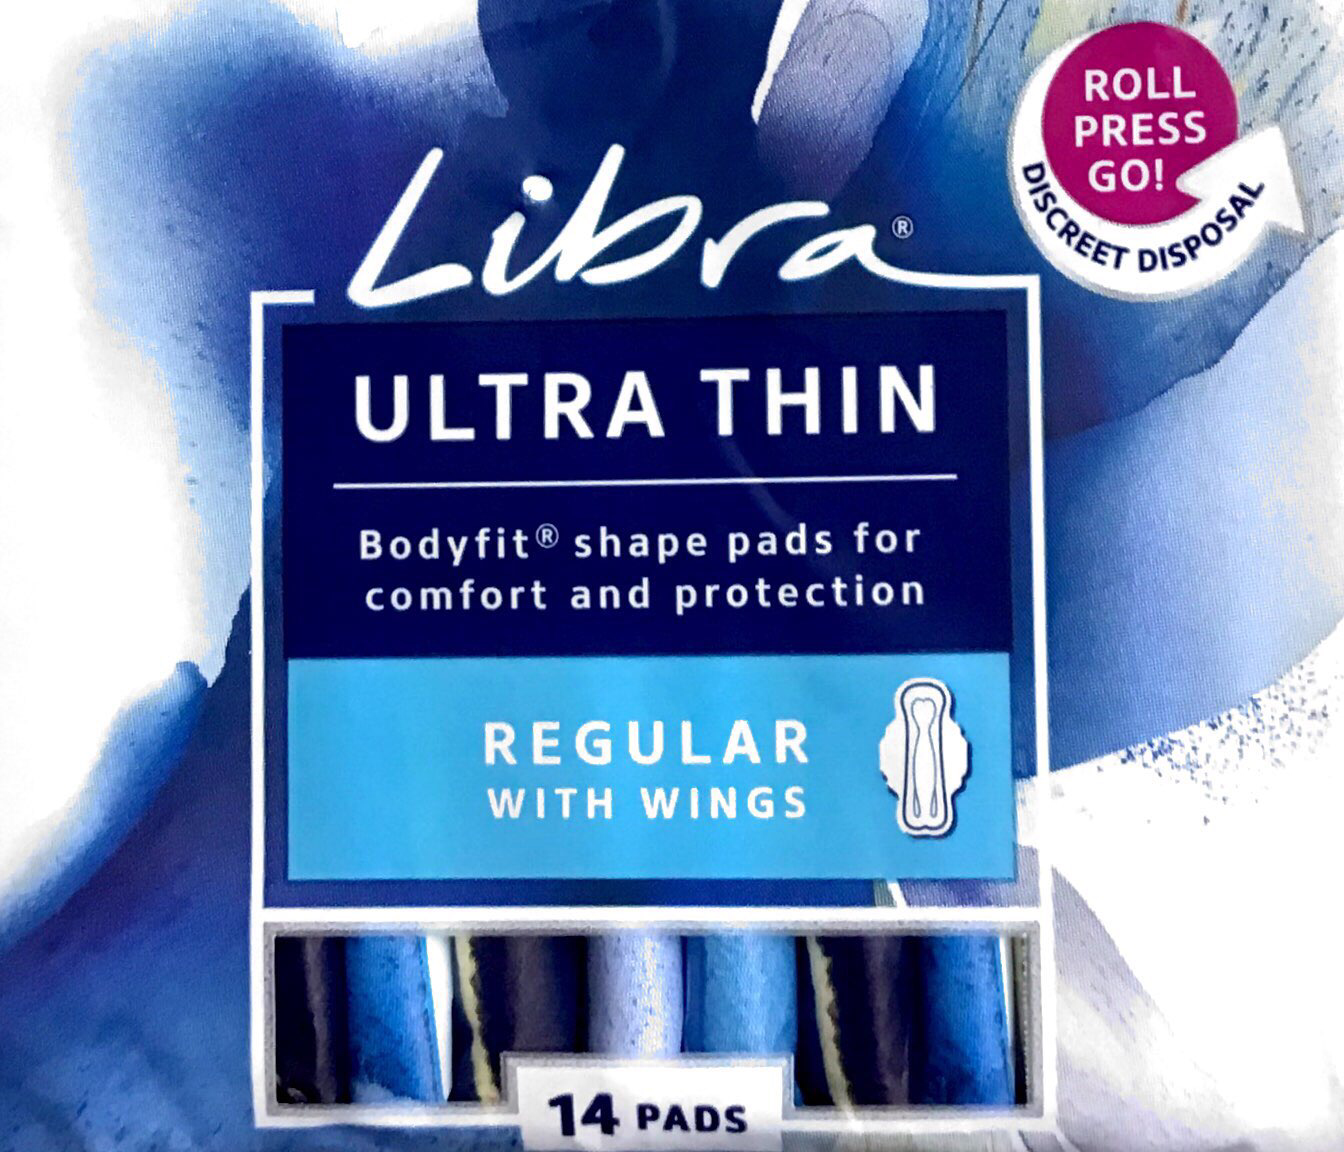 Libra ultra thin Regular with wings - Pads 14